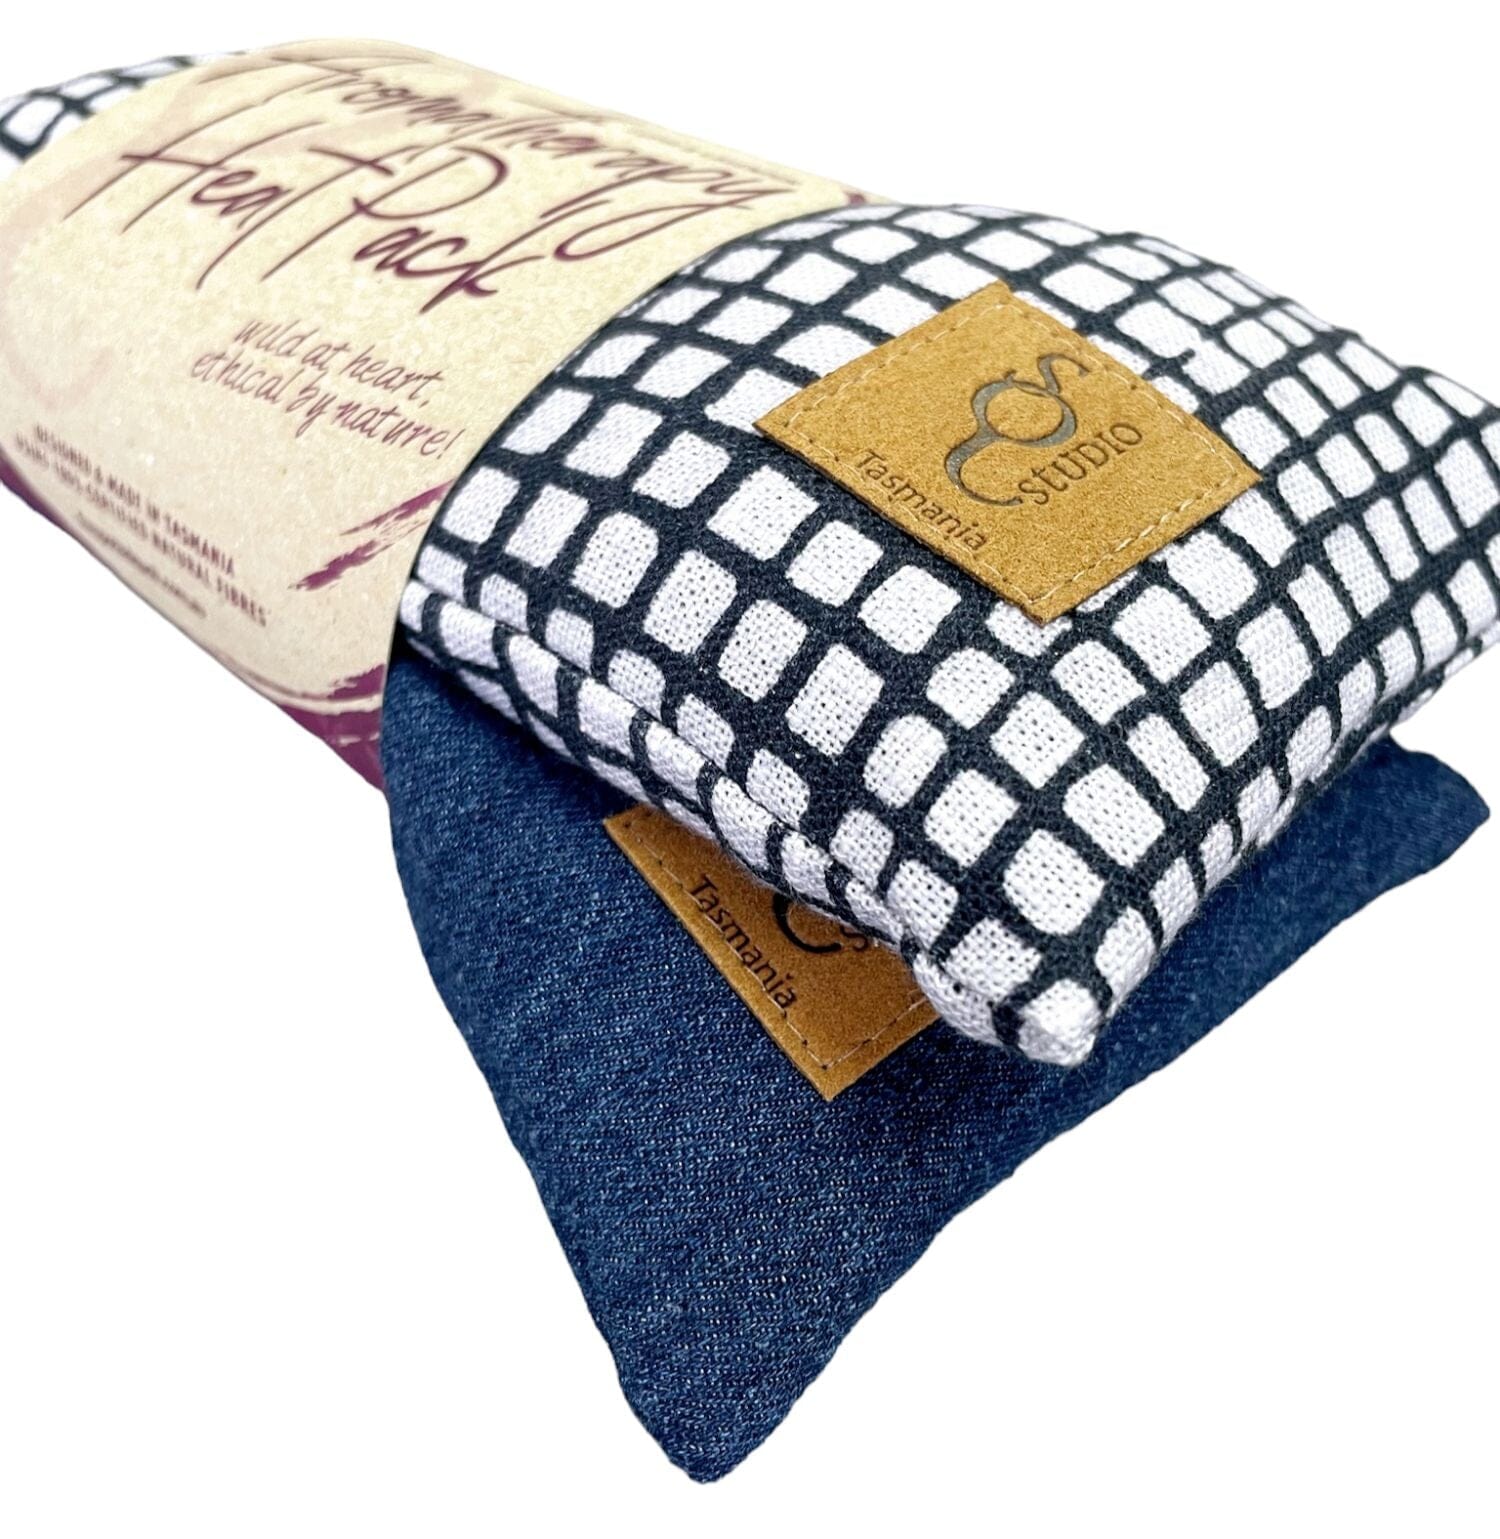 Aromatherapy Heat/Cold pack - Lupin & Lavender Heating Pads The Spotted Quoll Double Trouble Tessellated / Denim 